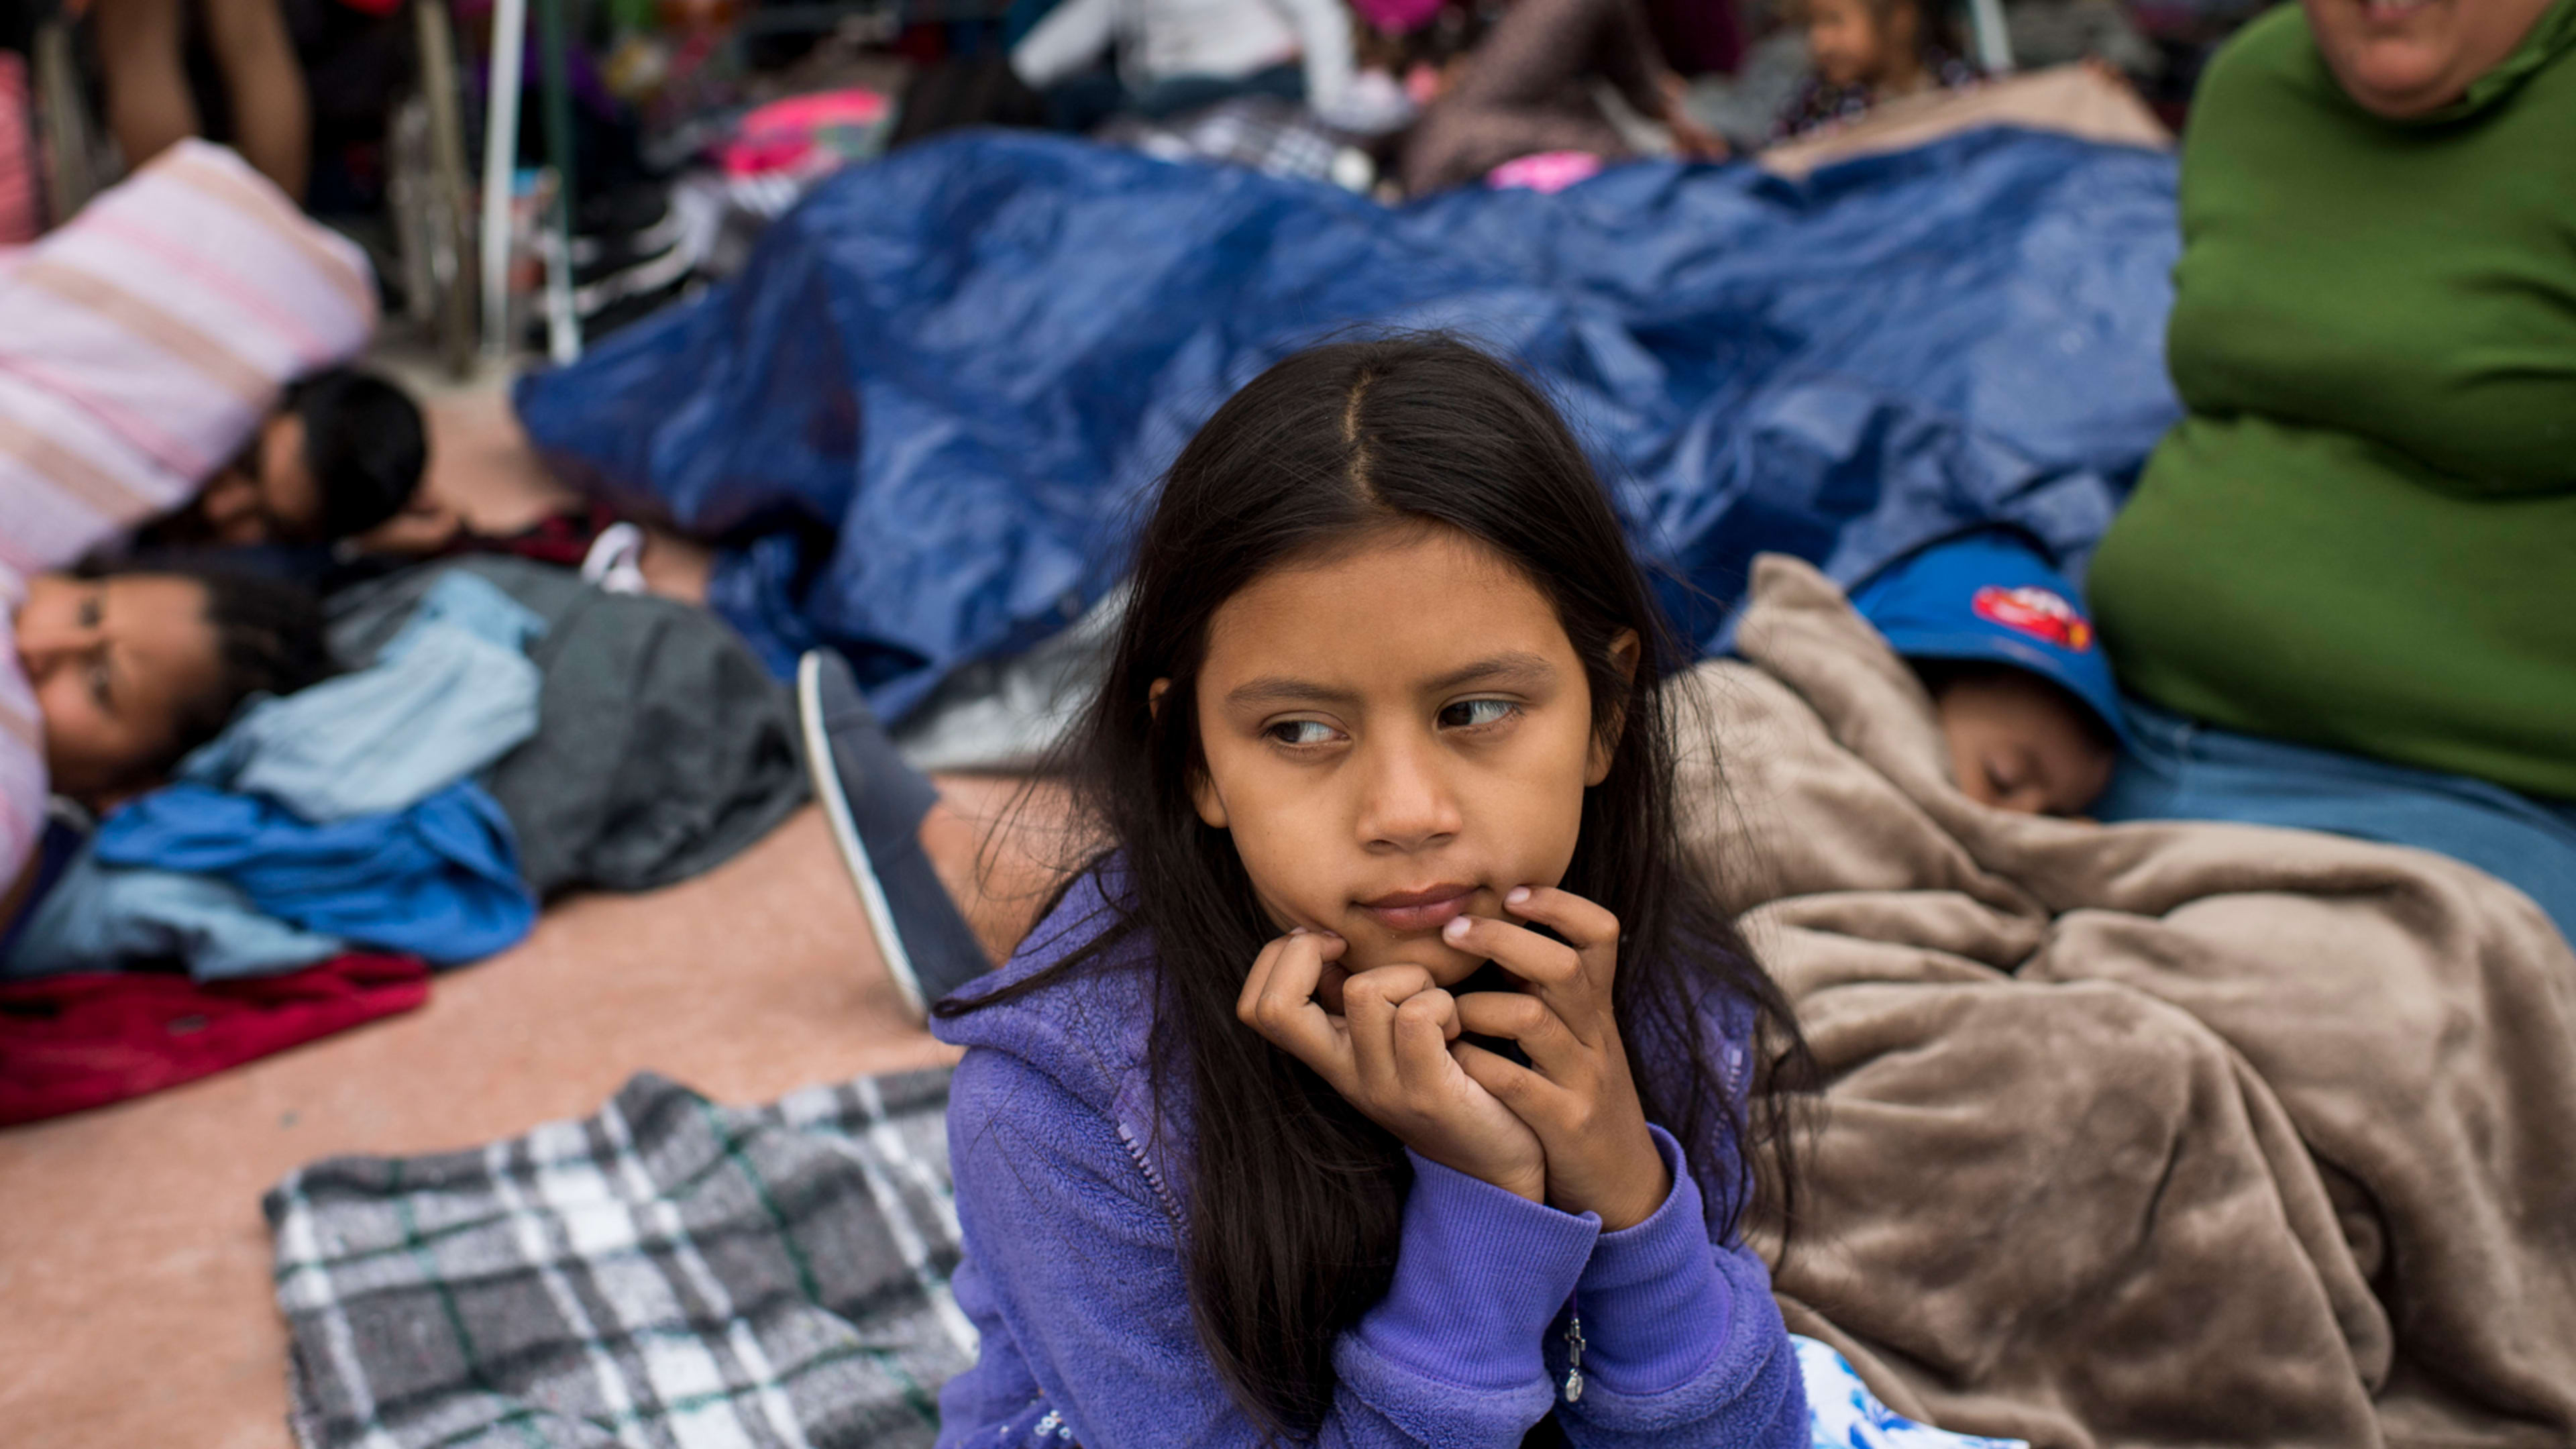 How to help immigrant children: 9 things you can do for separated families right now